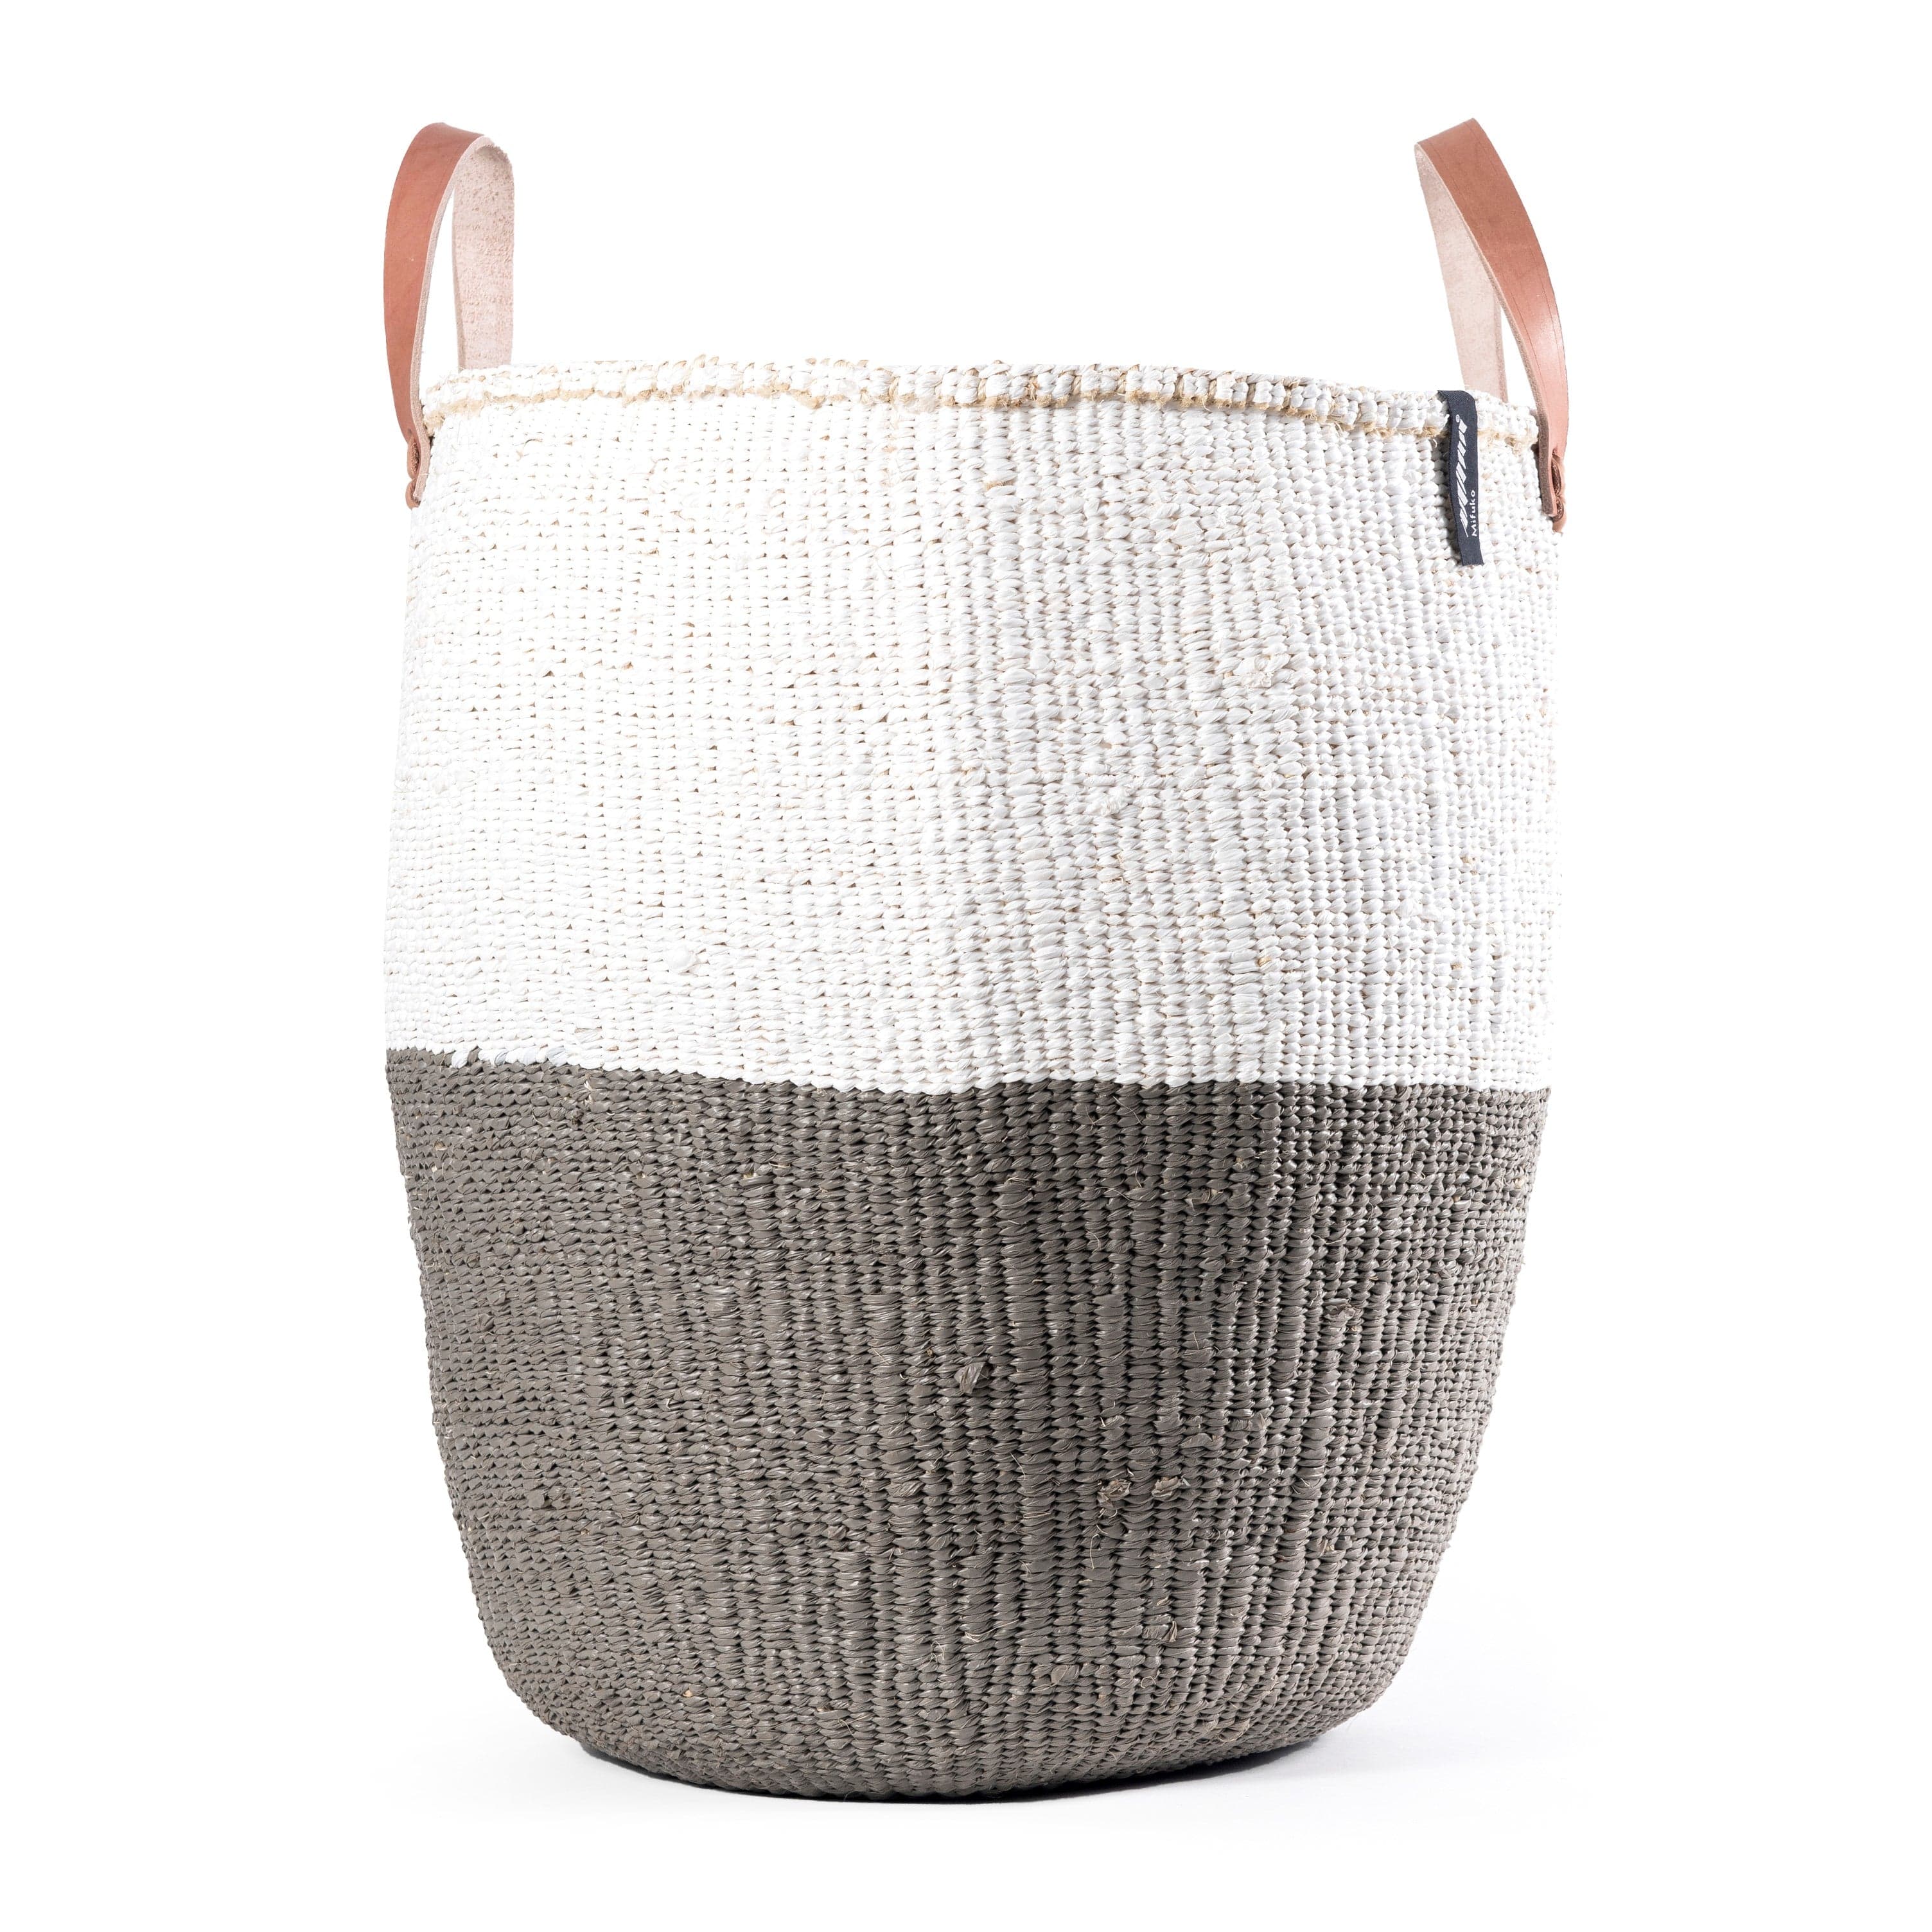 Mifuko Partly recycled plastic and sisal Market basket L Kiondo market basket | White and warm grey duo L